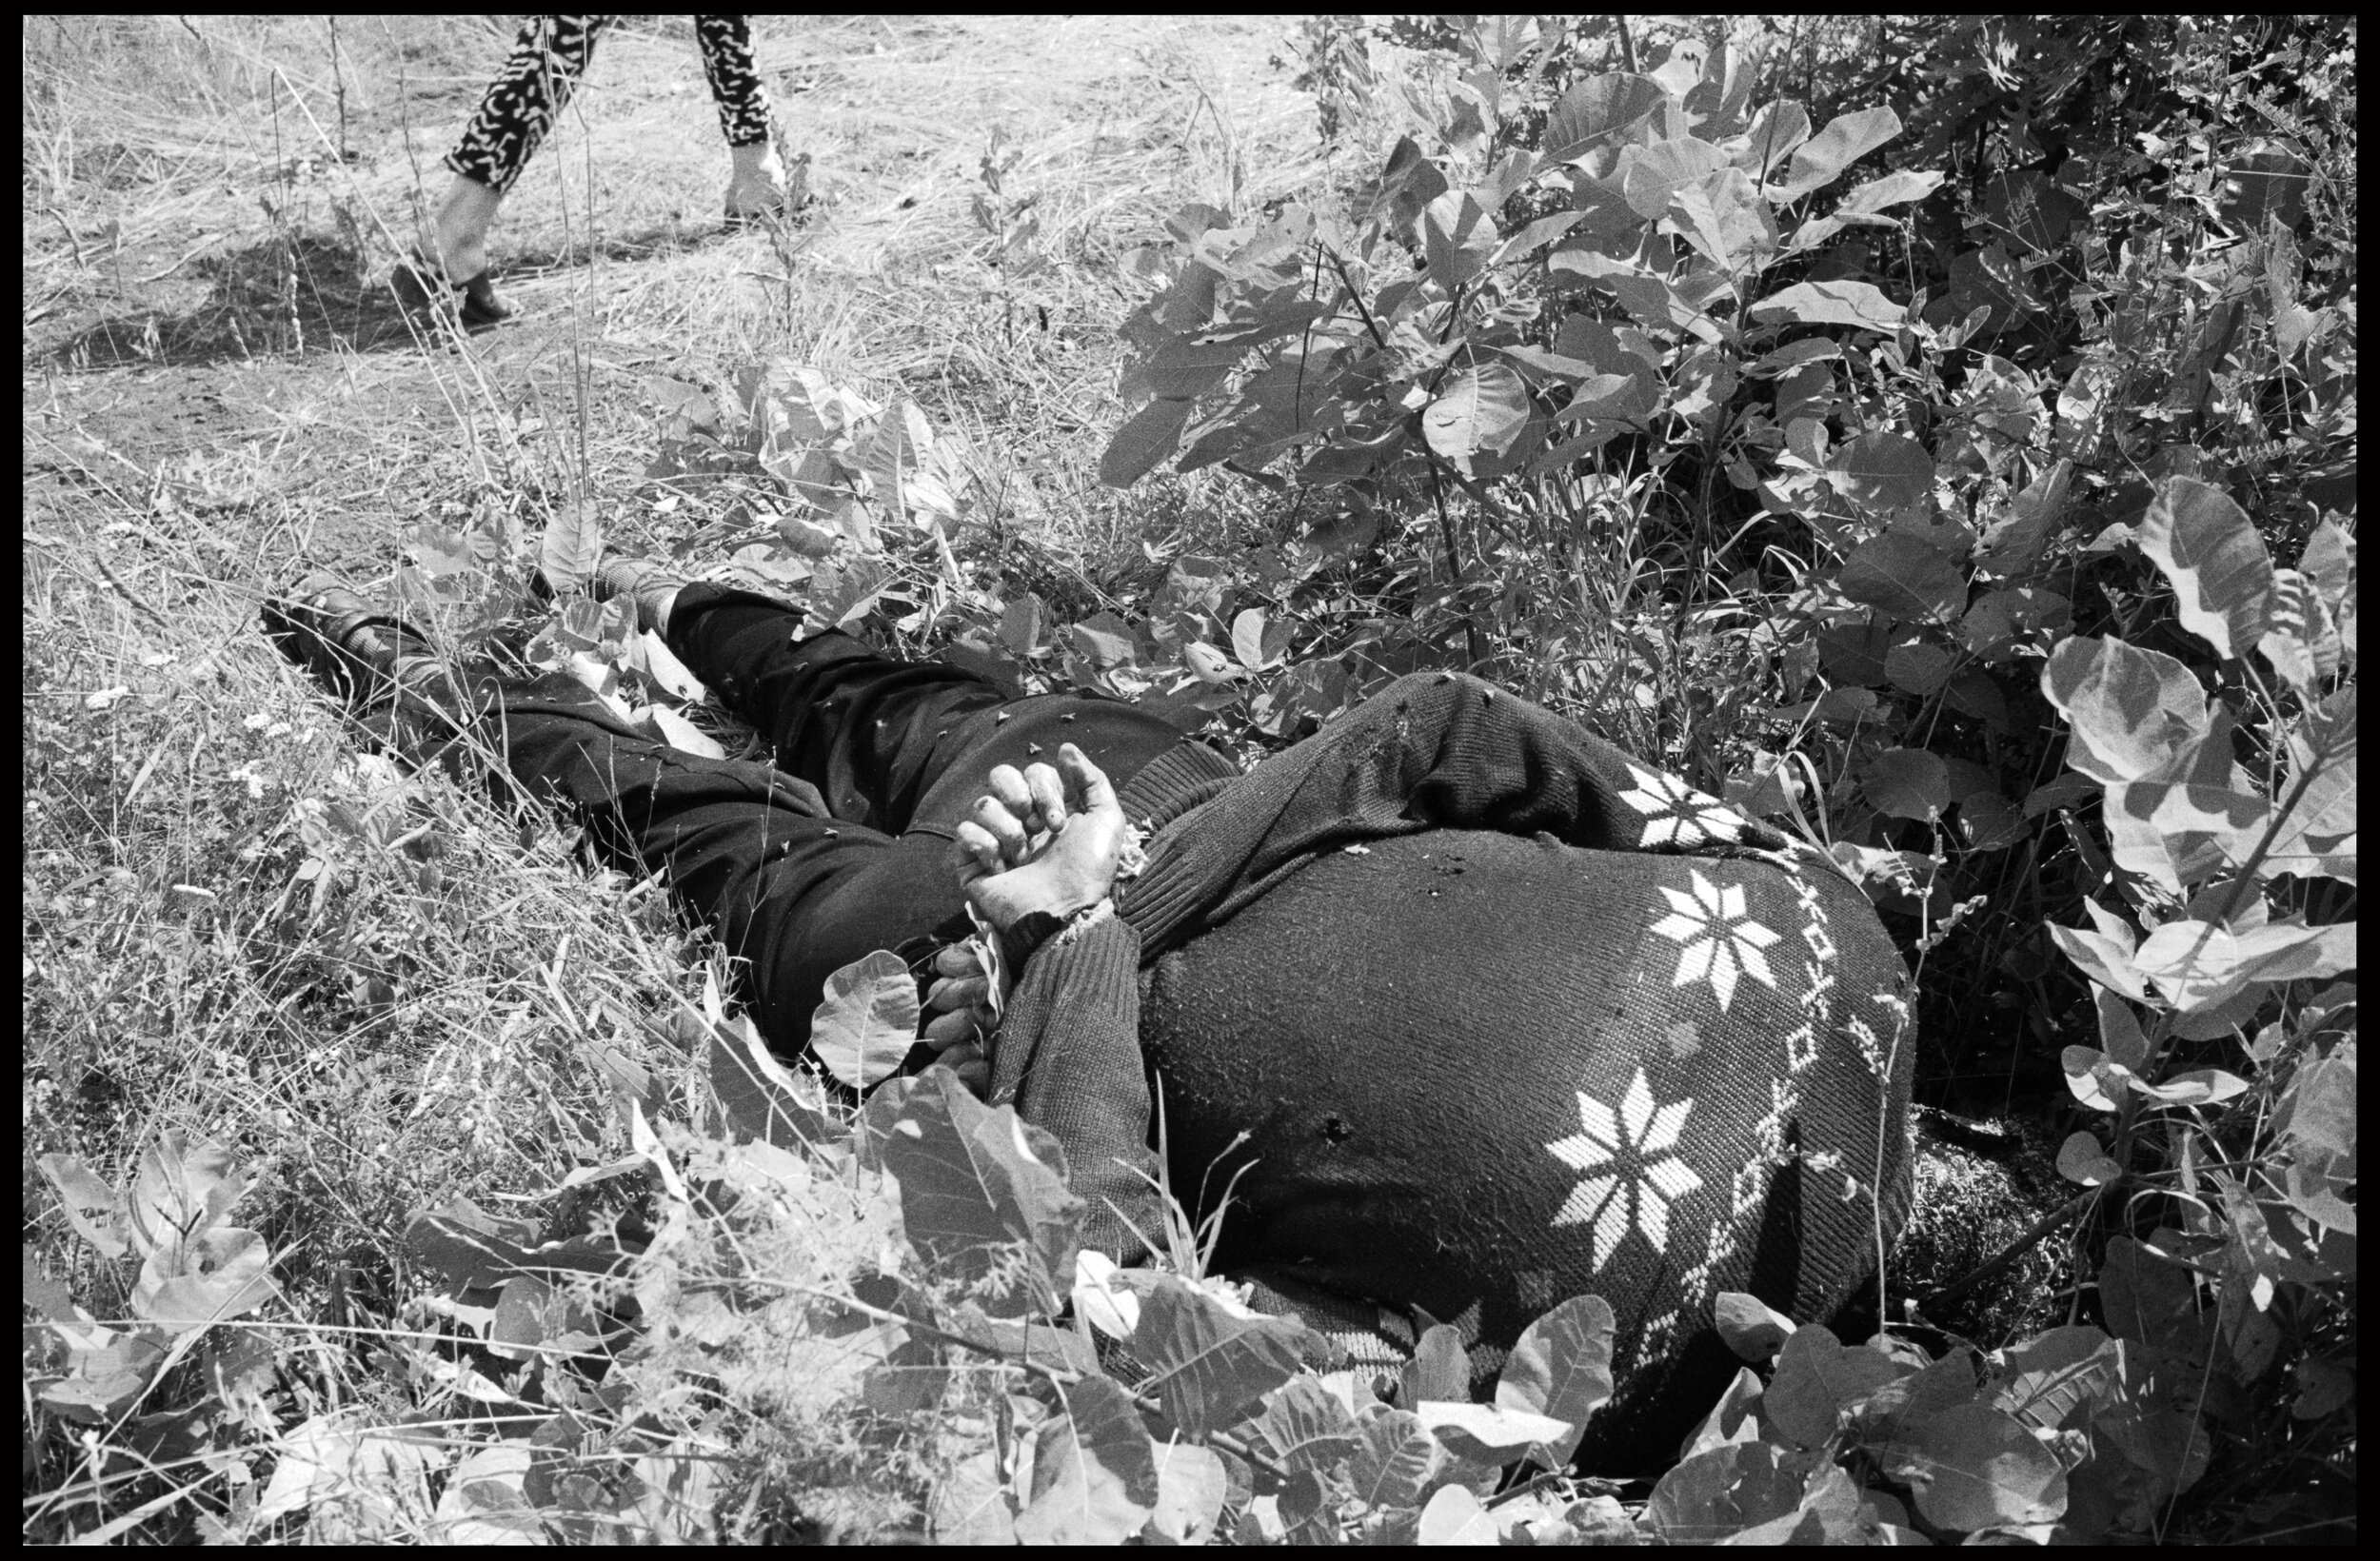  This and the following three photographs show the bodies of two men executed in a vineyard in the village of Xrce. The naked man carefully folded his clothes and tucked his socks into his shoes before he was killed. It appears that the killers wante